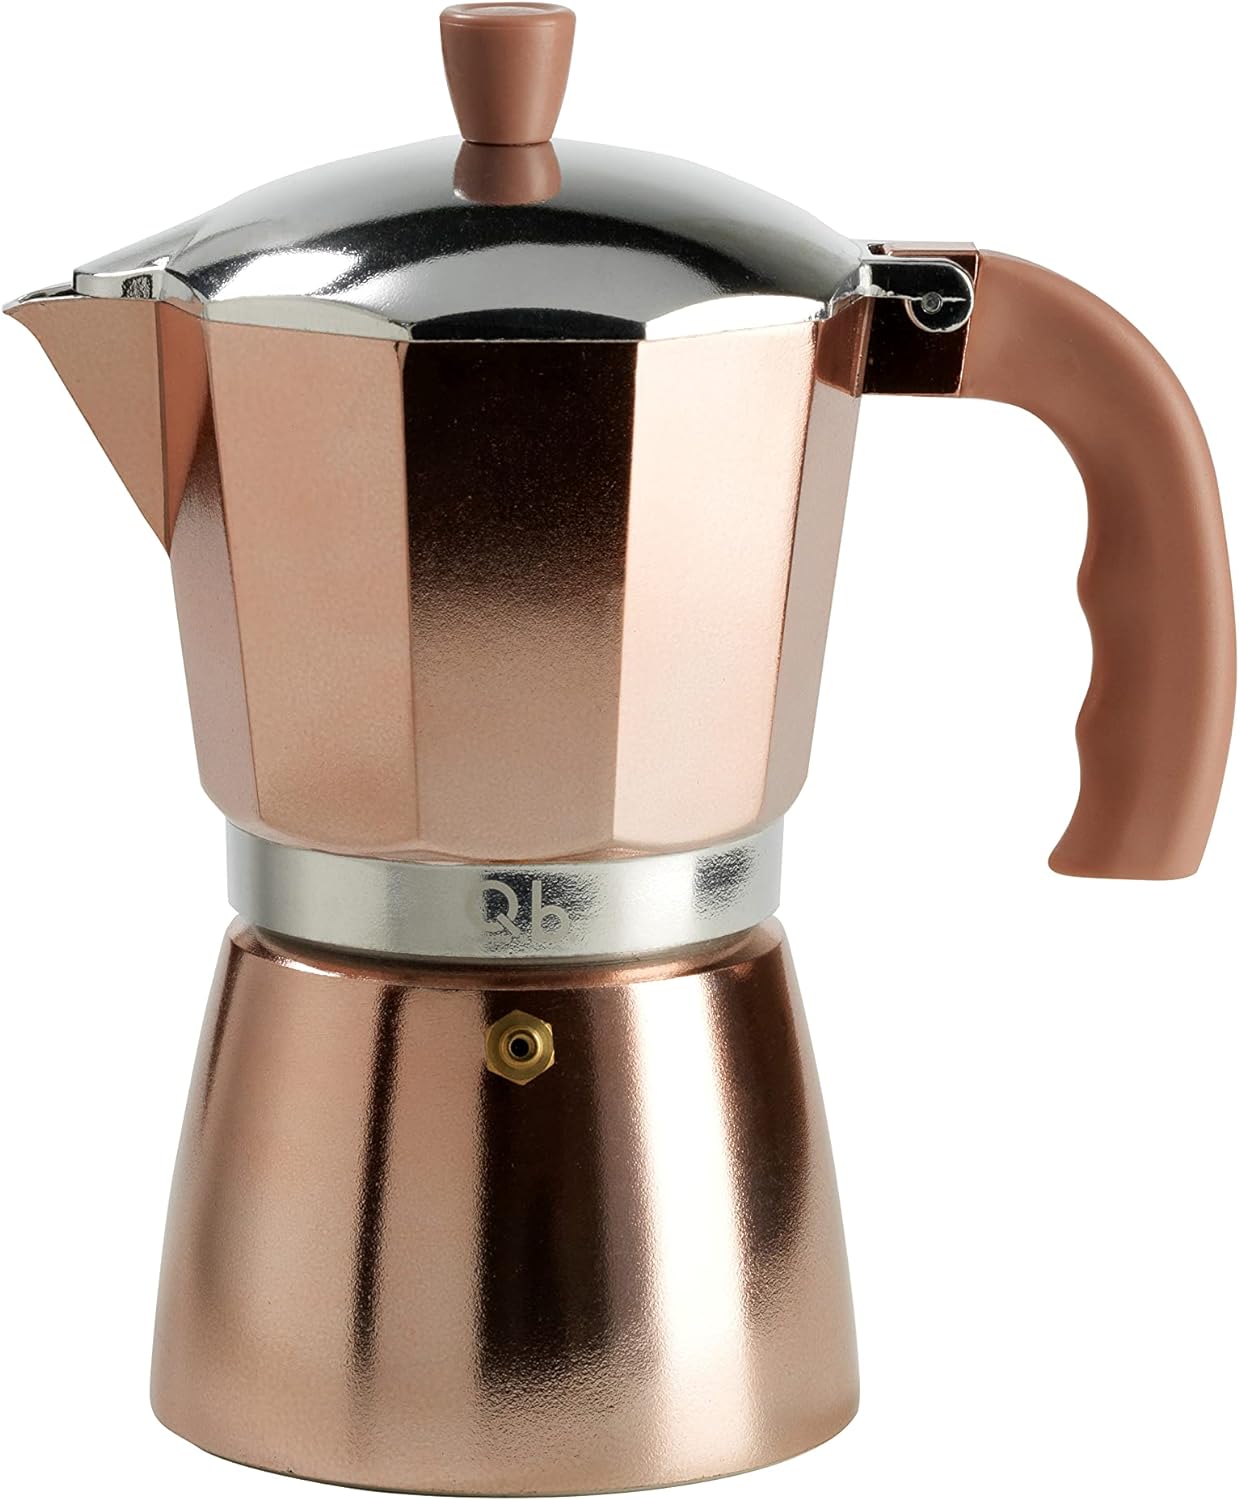 Fluo Q.B. By Mopita 6 Cup Espresso Maker Aluminum Silicone Coated Anti-Scald Handle for All Cooking Surfaces, NO Induction, Rose Gold